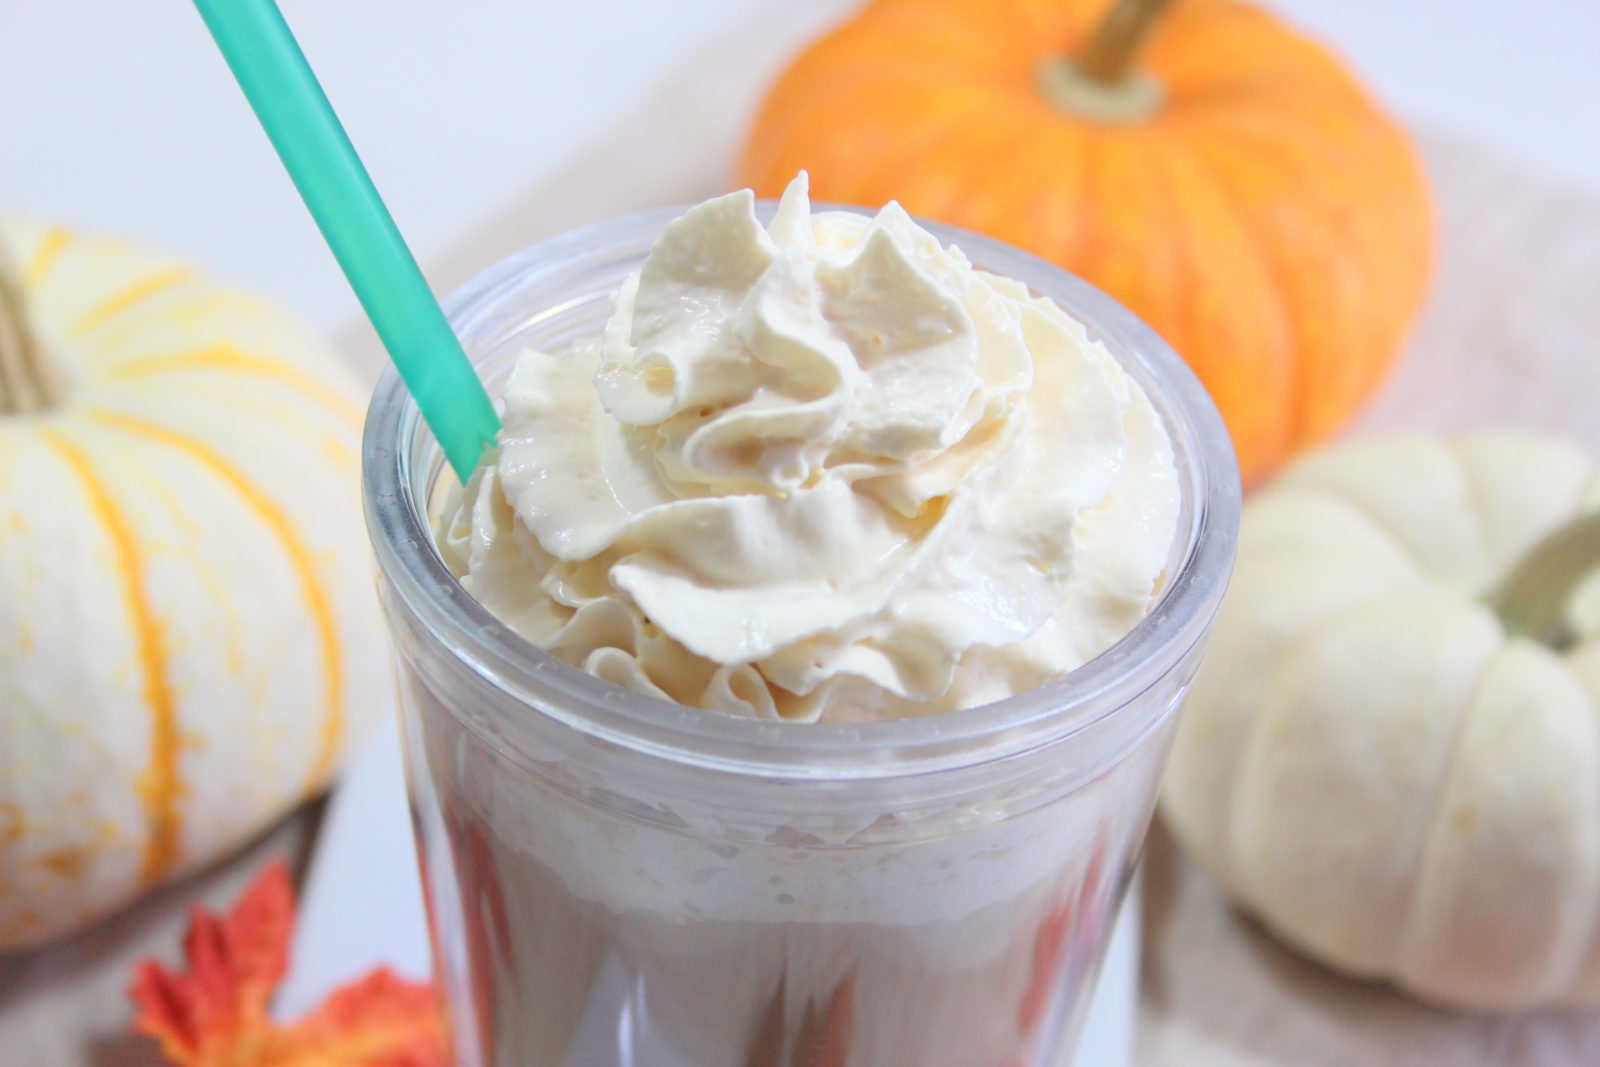 How to make Iced Pumpkin Spice Latte